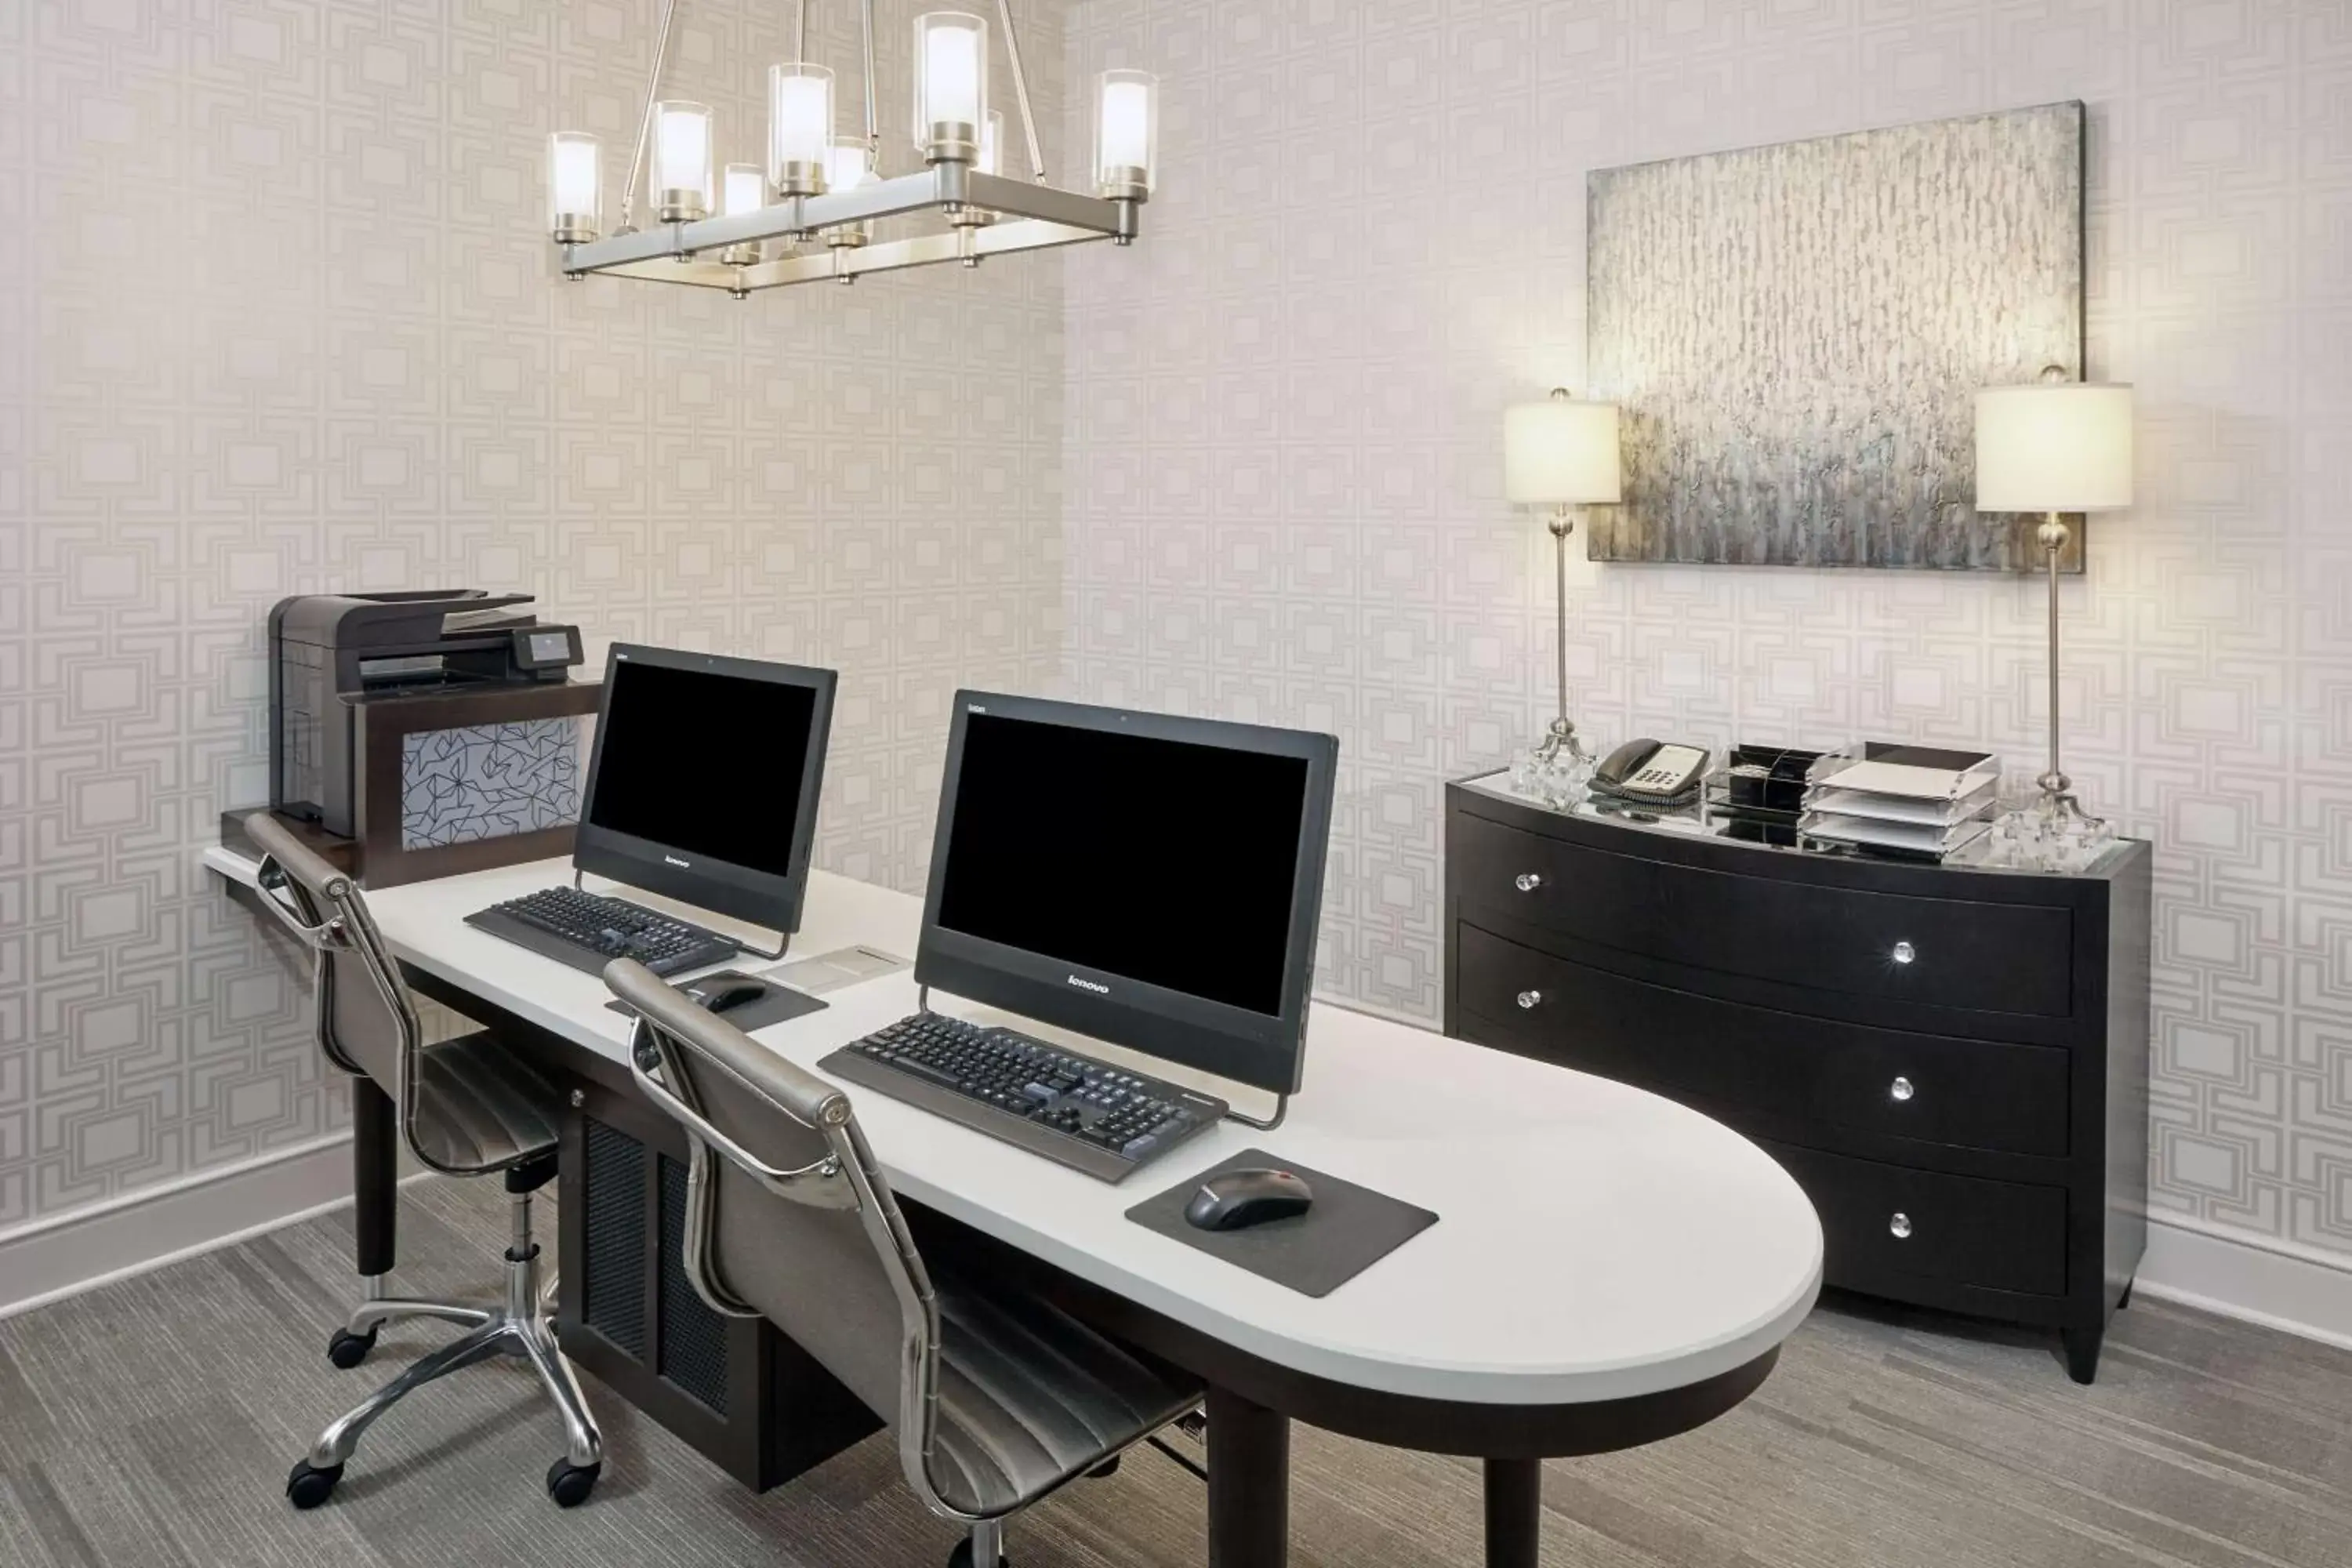 Business facilities in Homewood Suites Lafayette